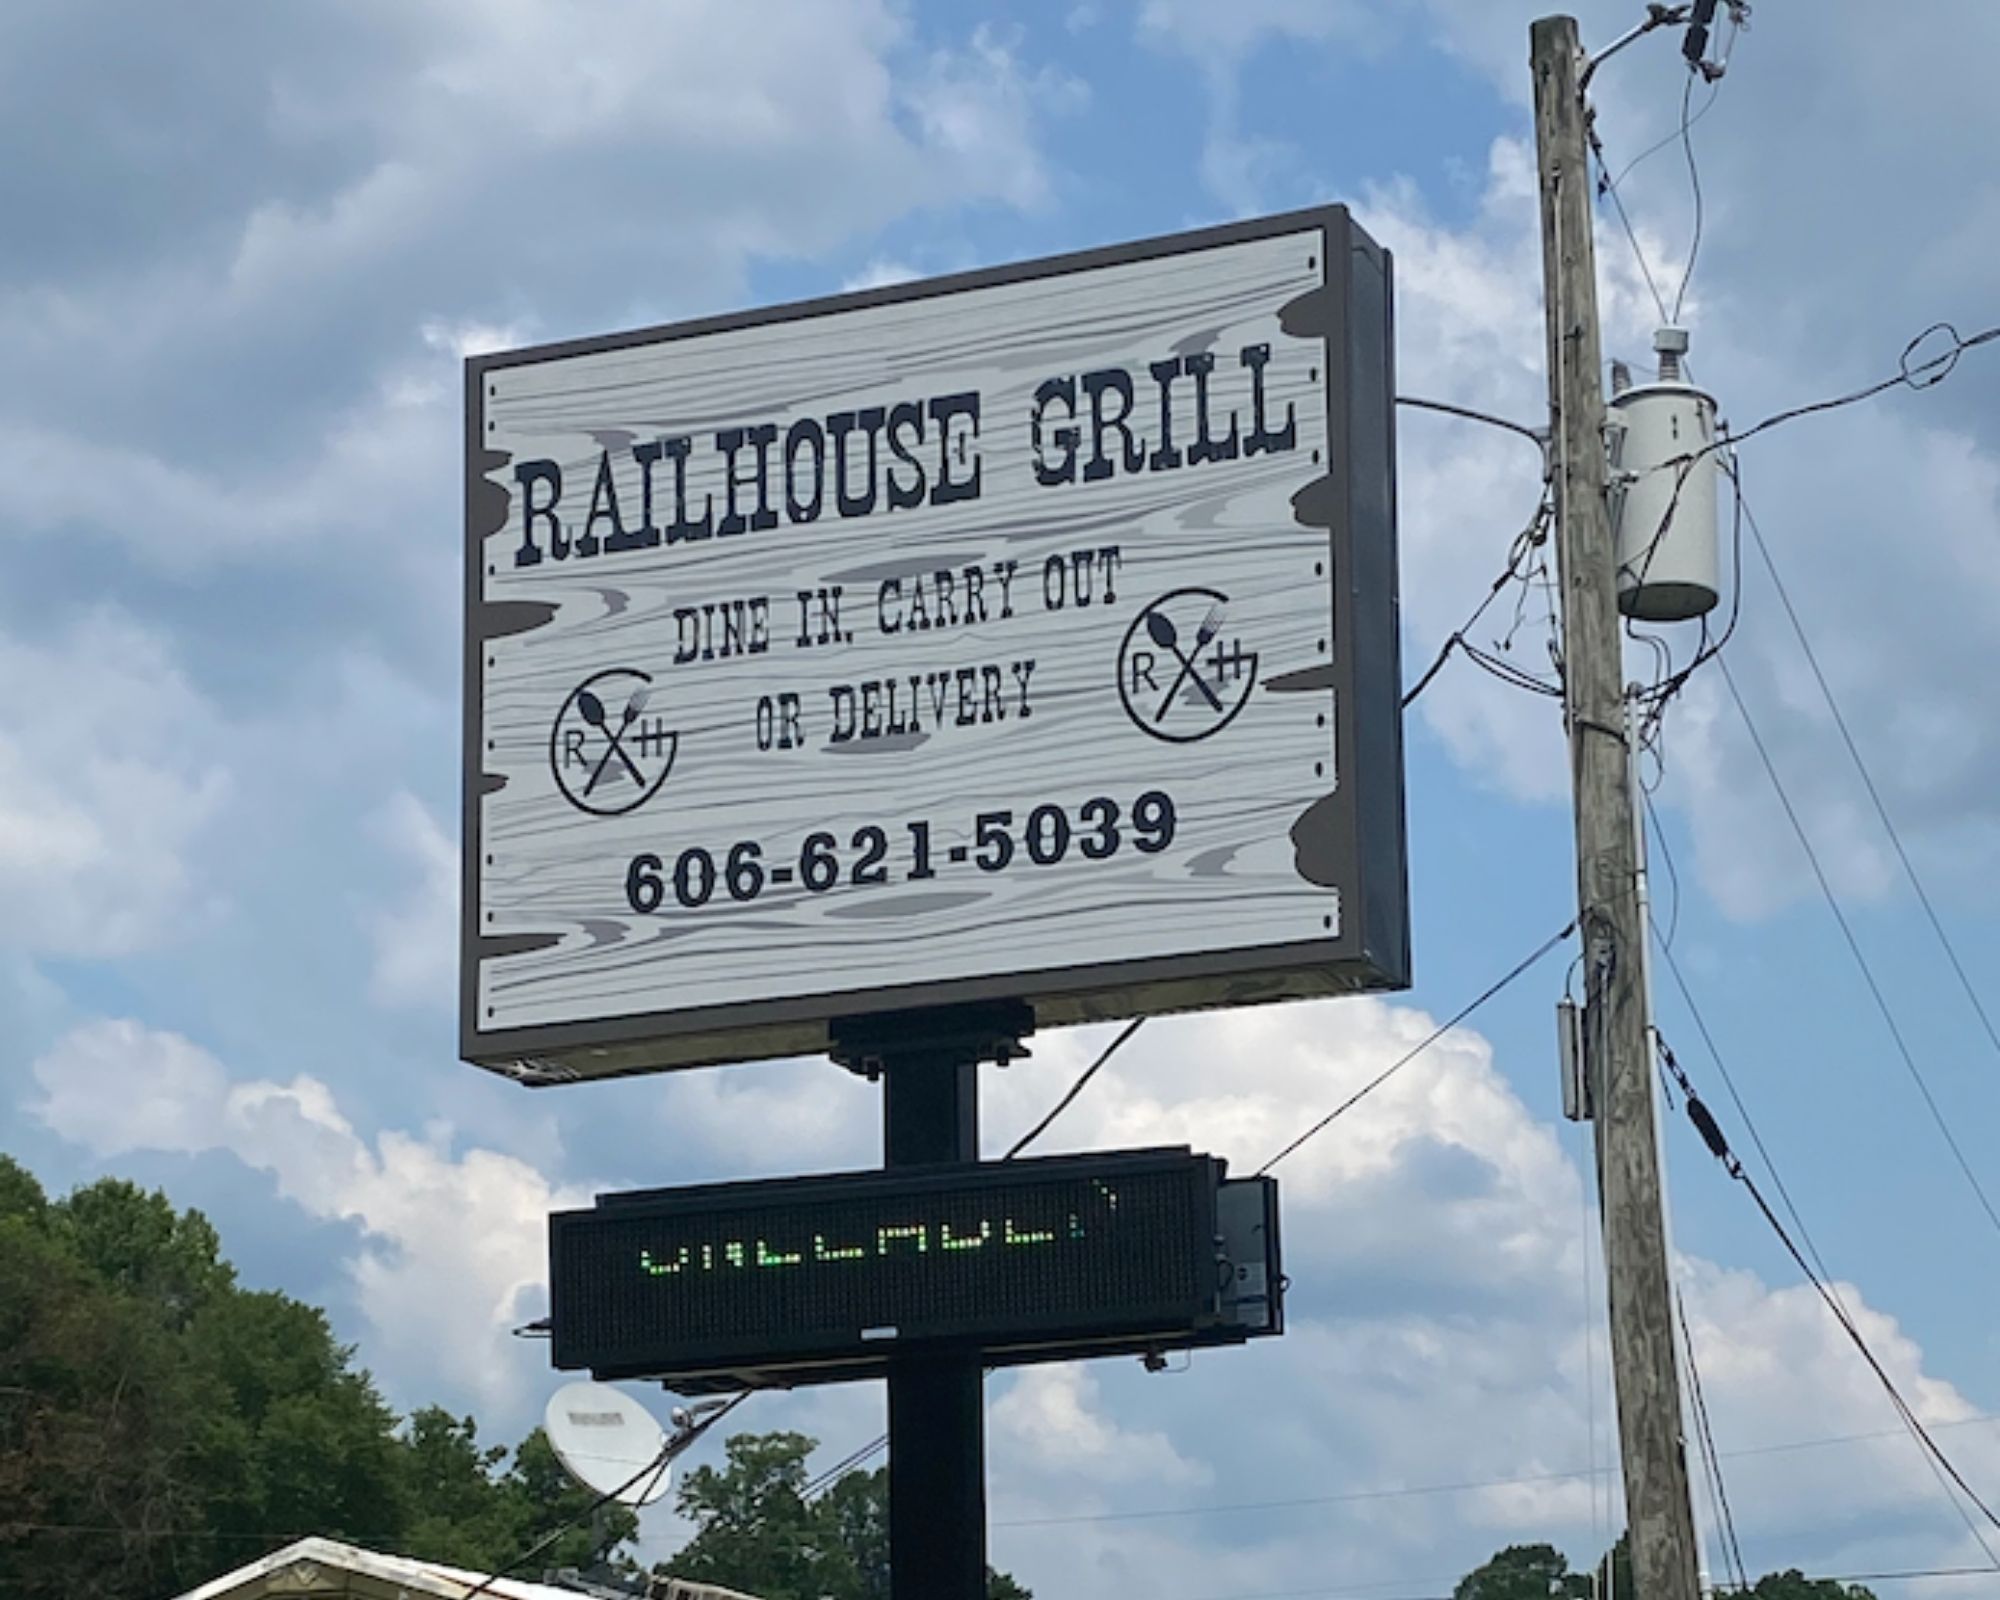 Railhouse Grill Scaled